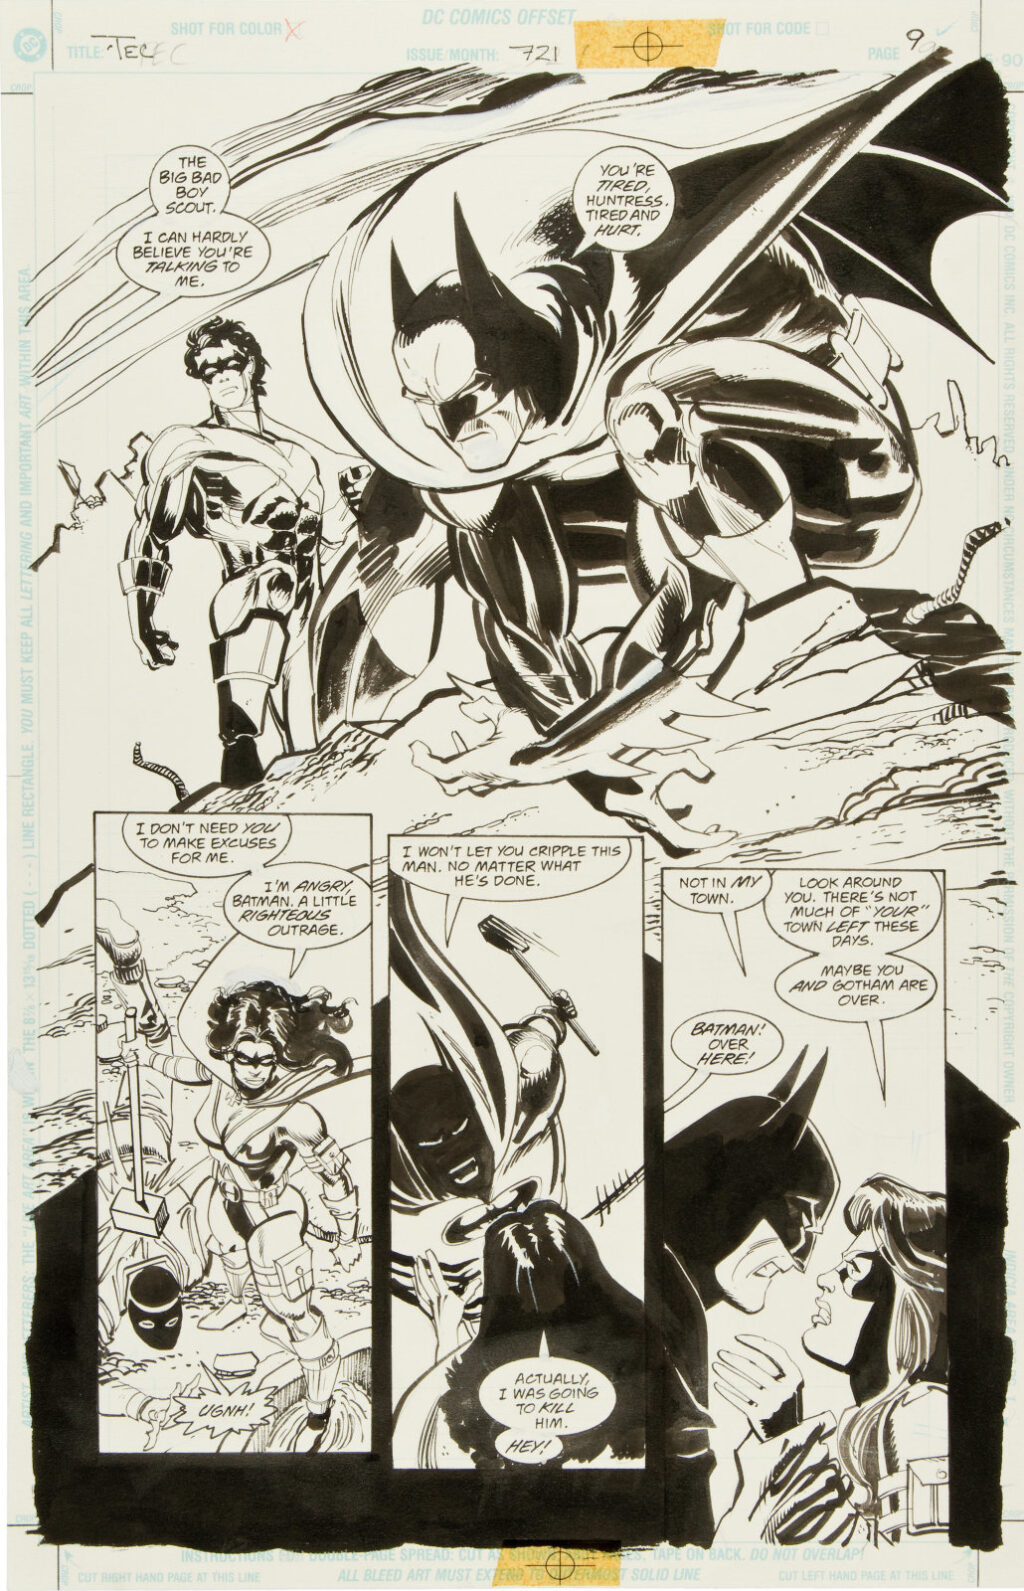 Detective Comics issue 721 page 9 by Graham Nolan and Klaus Janson